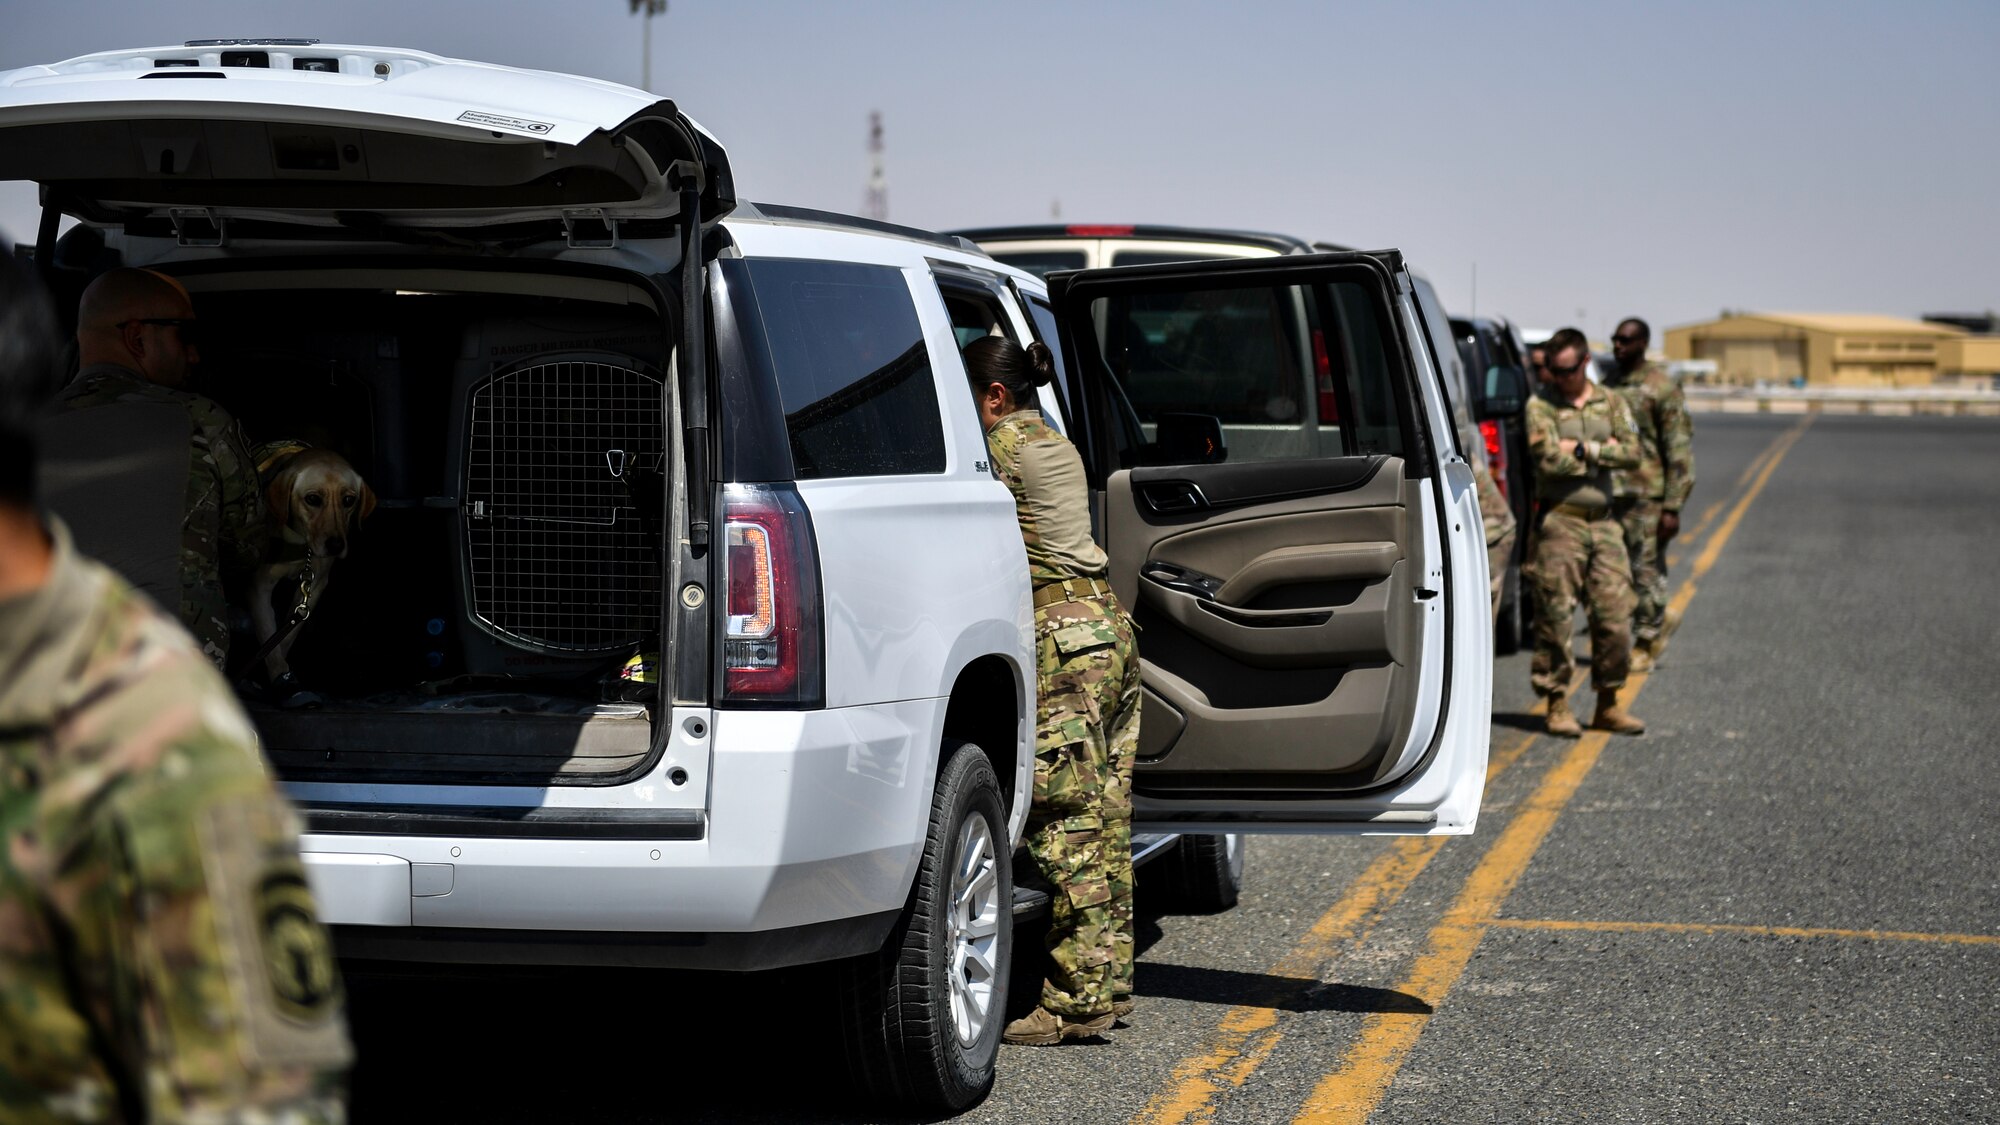 Service members from the U.S. Air Force, Army and Navy offload vehicles and prepare military working dogs for a medical evacuation exercise at Ali Al Salem Air Base, Kuwait, Sept. 13, 2019. The exercise included veterinarian clinical specialist’s with the 149th Medical Detachment Veterinary Service Support Unit; medical first responders with the 386th Expeditionary Medical Group and more than 15 military working dog teams from various units around the U.S. Central Command area of responsibility. (U.S. Air Force photo by Staff Sgt. Mozer O. Da Cunha)